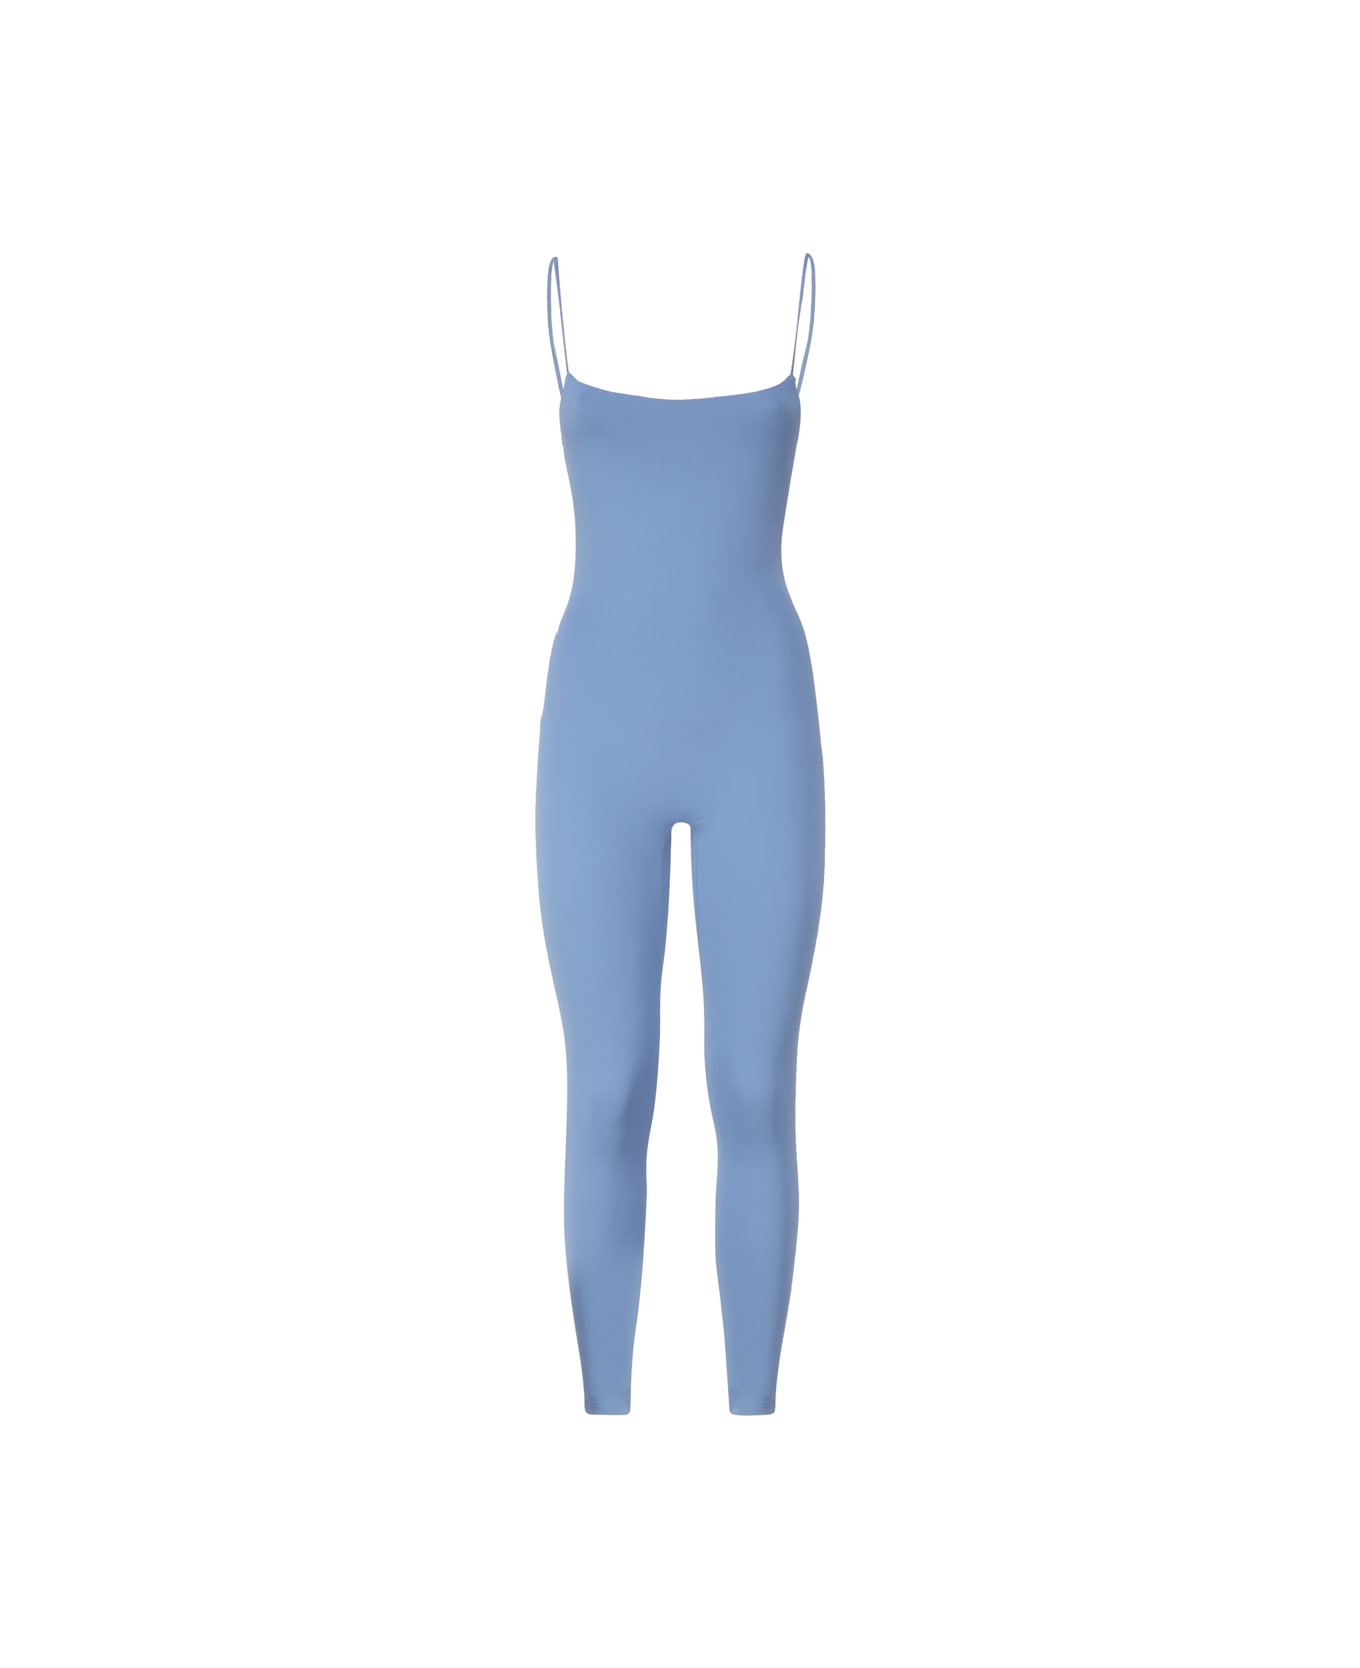 The Andamane Jumpsuit With Shoulder Pads - Light blue ジャンプスーツ